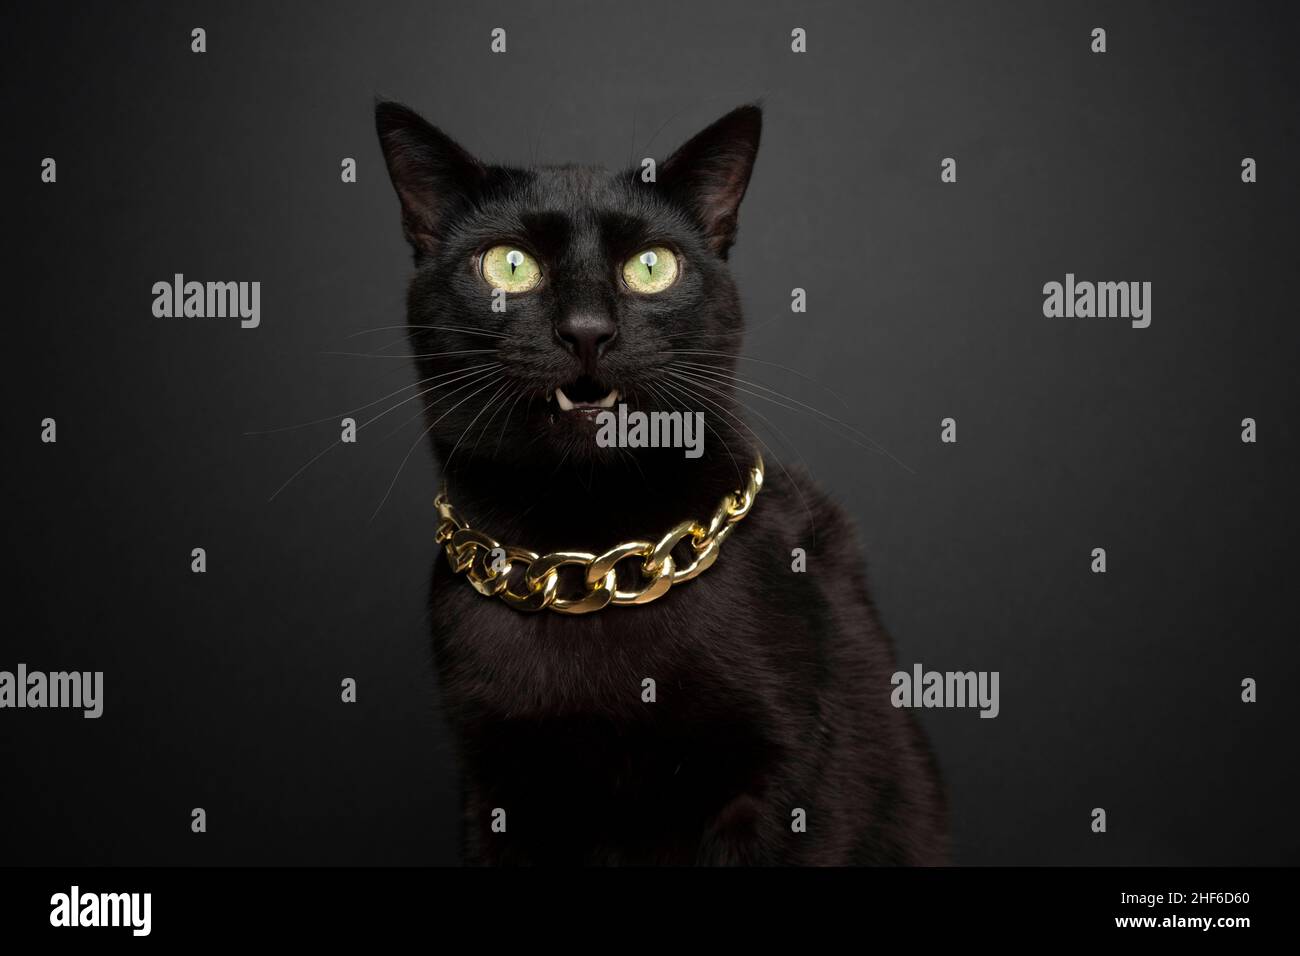 cool black cat with mouth open meowing wearing gold chain on black background Stock Photo